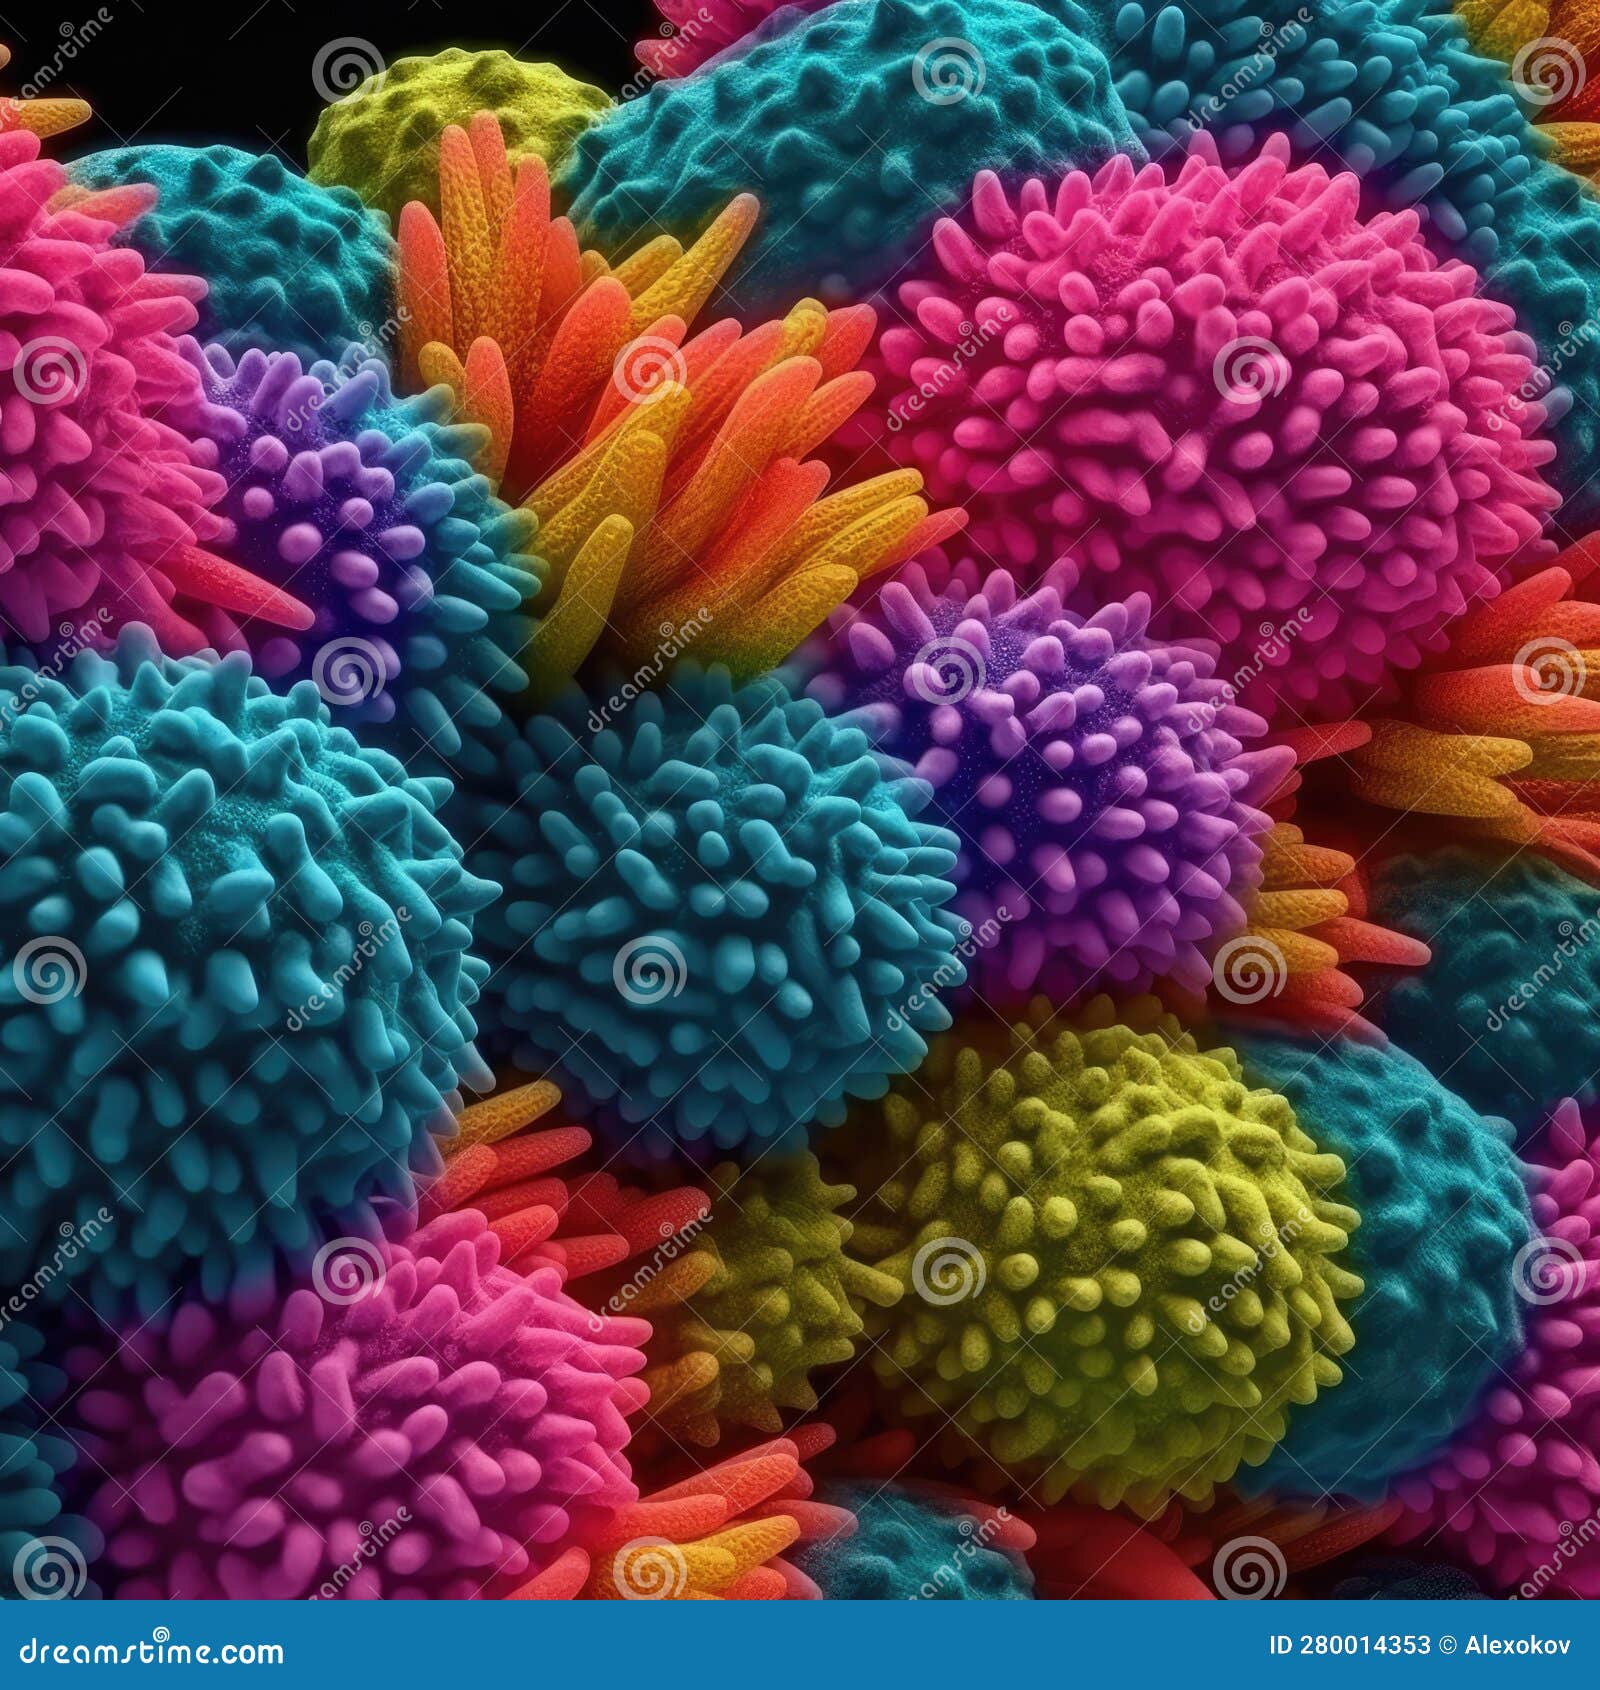 vivid colors of ribosomes synthesizing proteins in 4k. ideal for educational materials.